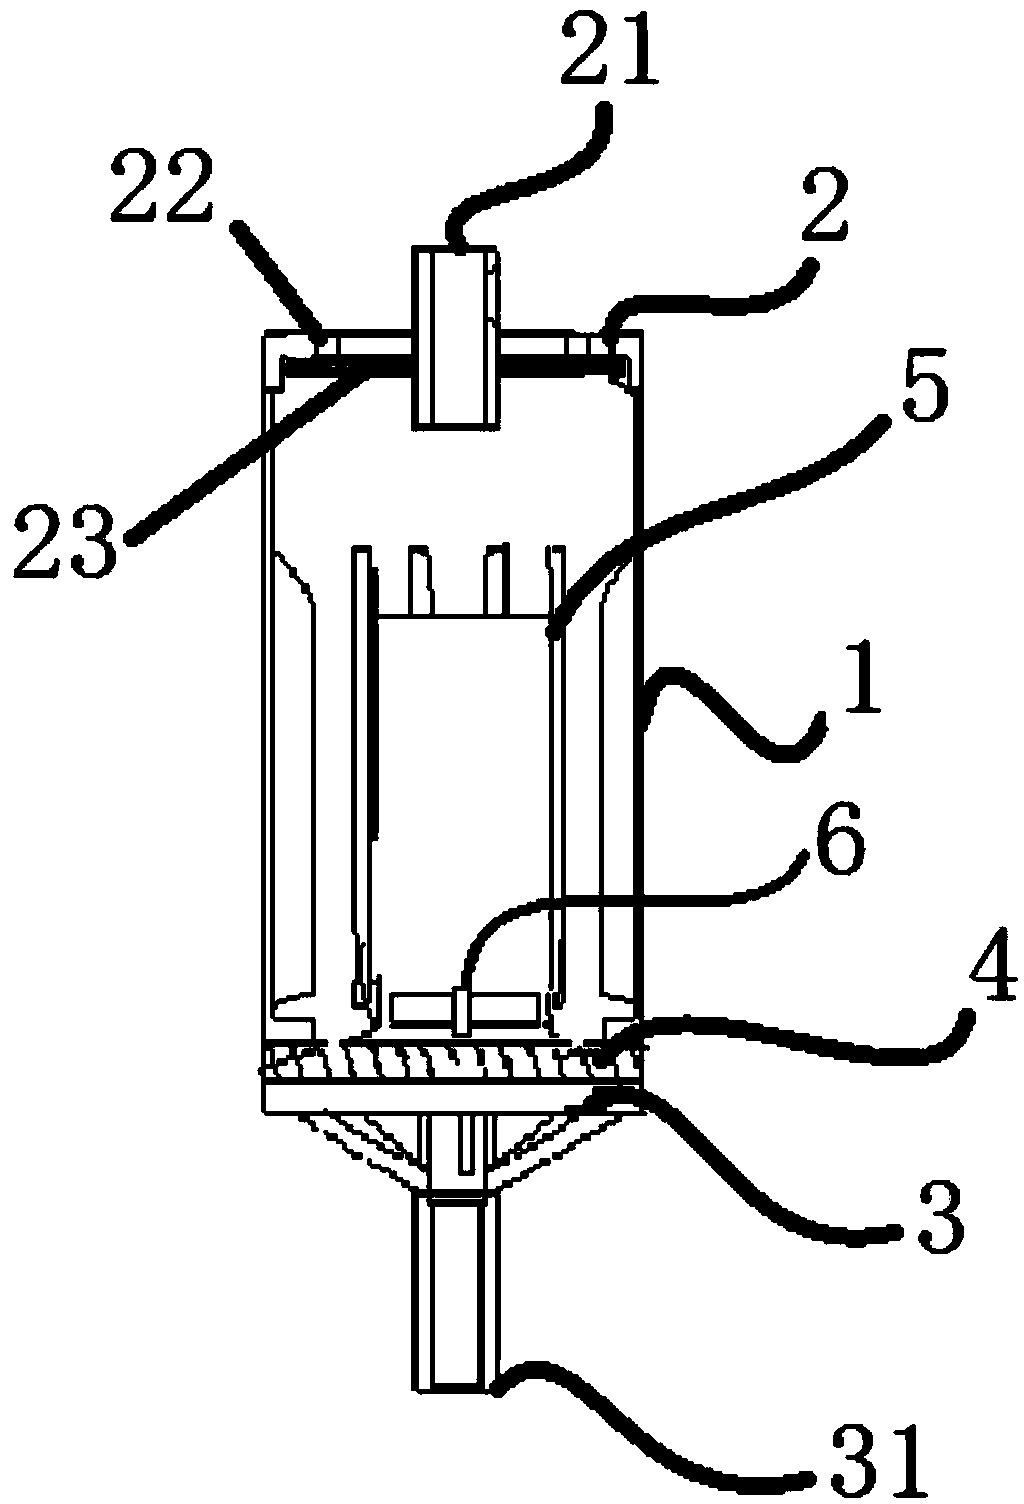 Blood return prevention time-controllable filter for medical infusion apparatus and medical infusion apparatus